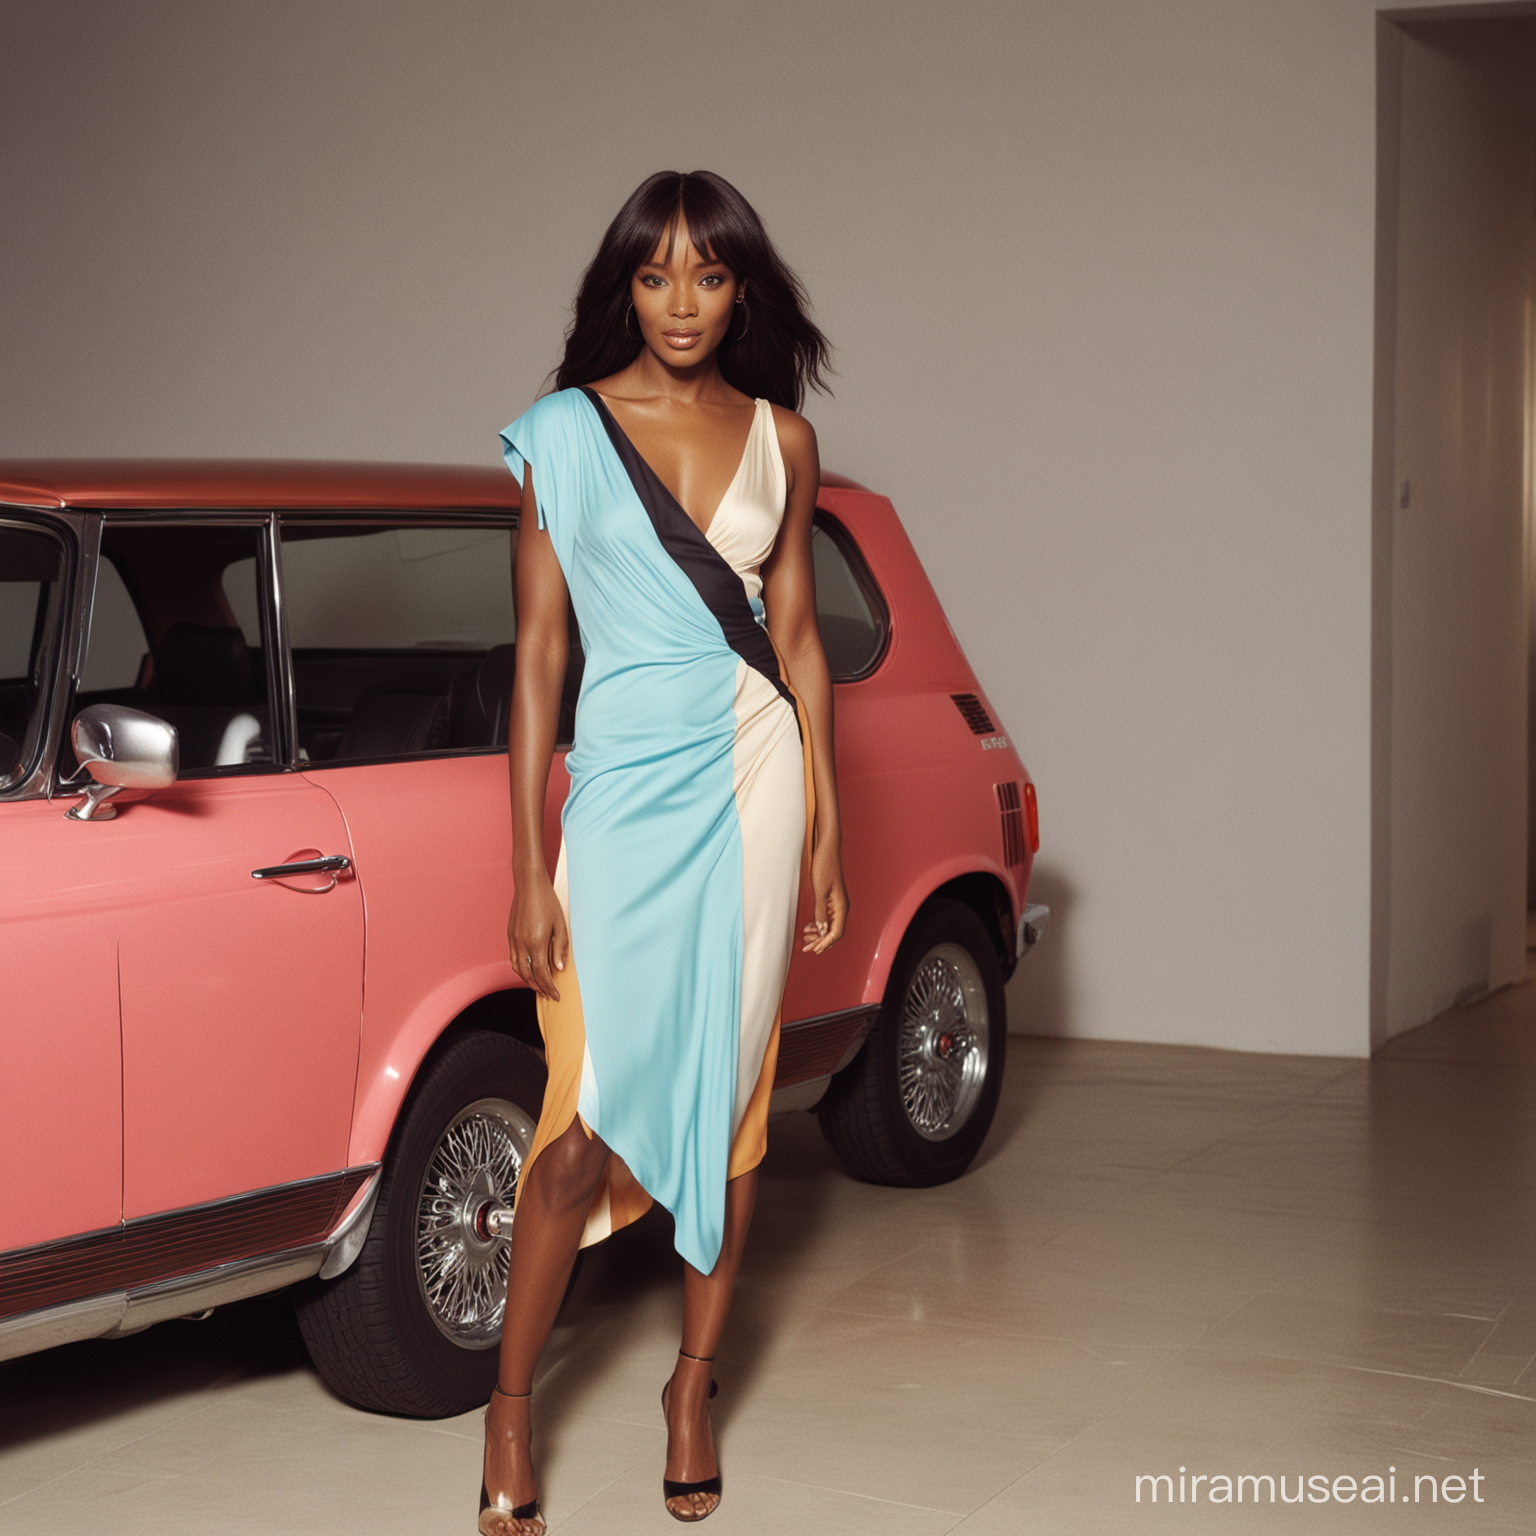 Naomi Campbell in an ultra mini draped dress with retro-inspired color block, dual colors, candid shot on Kodak potra 800, 35mm lens, color grading, 4k, UHD –ar 3:5 –q 2

